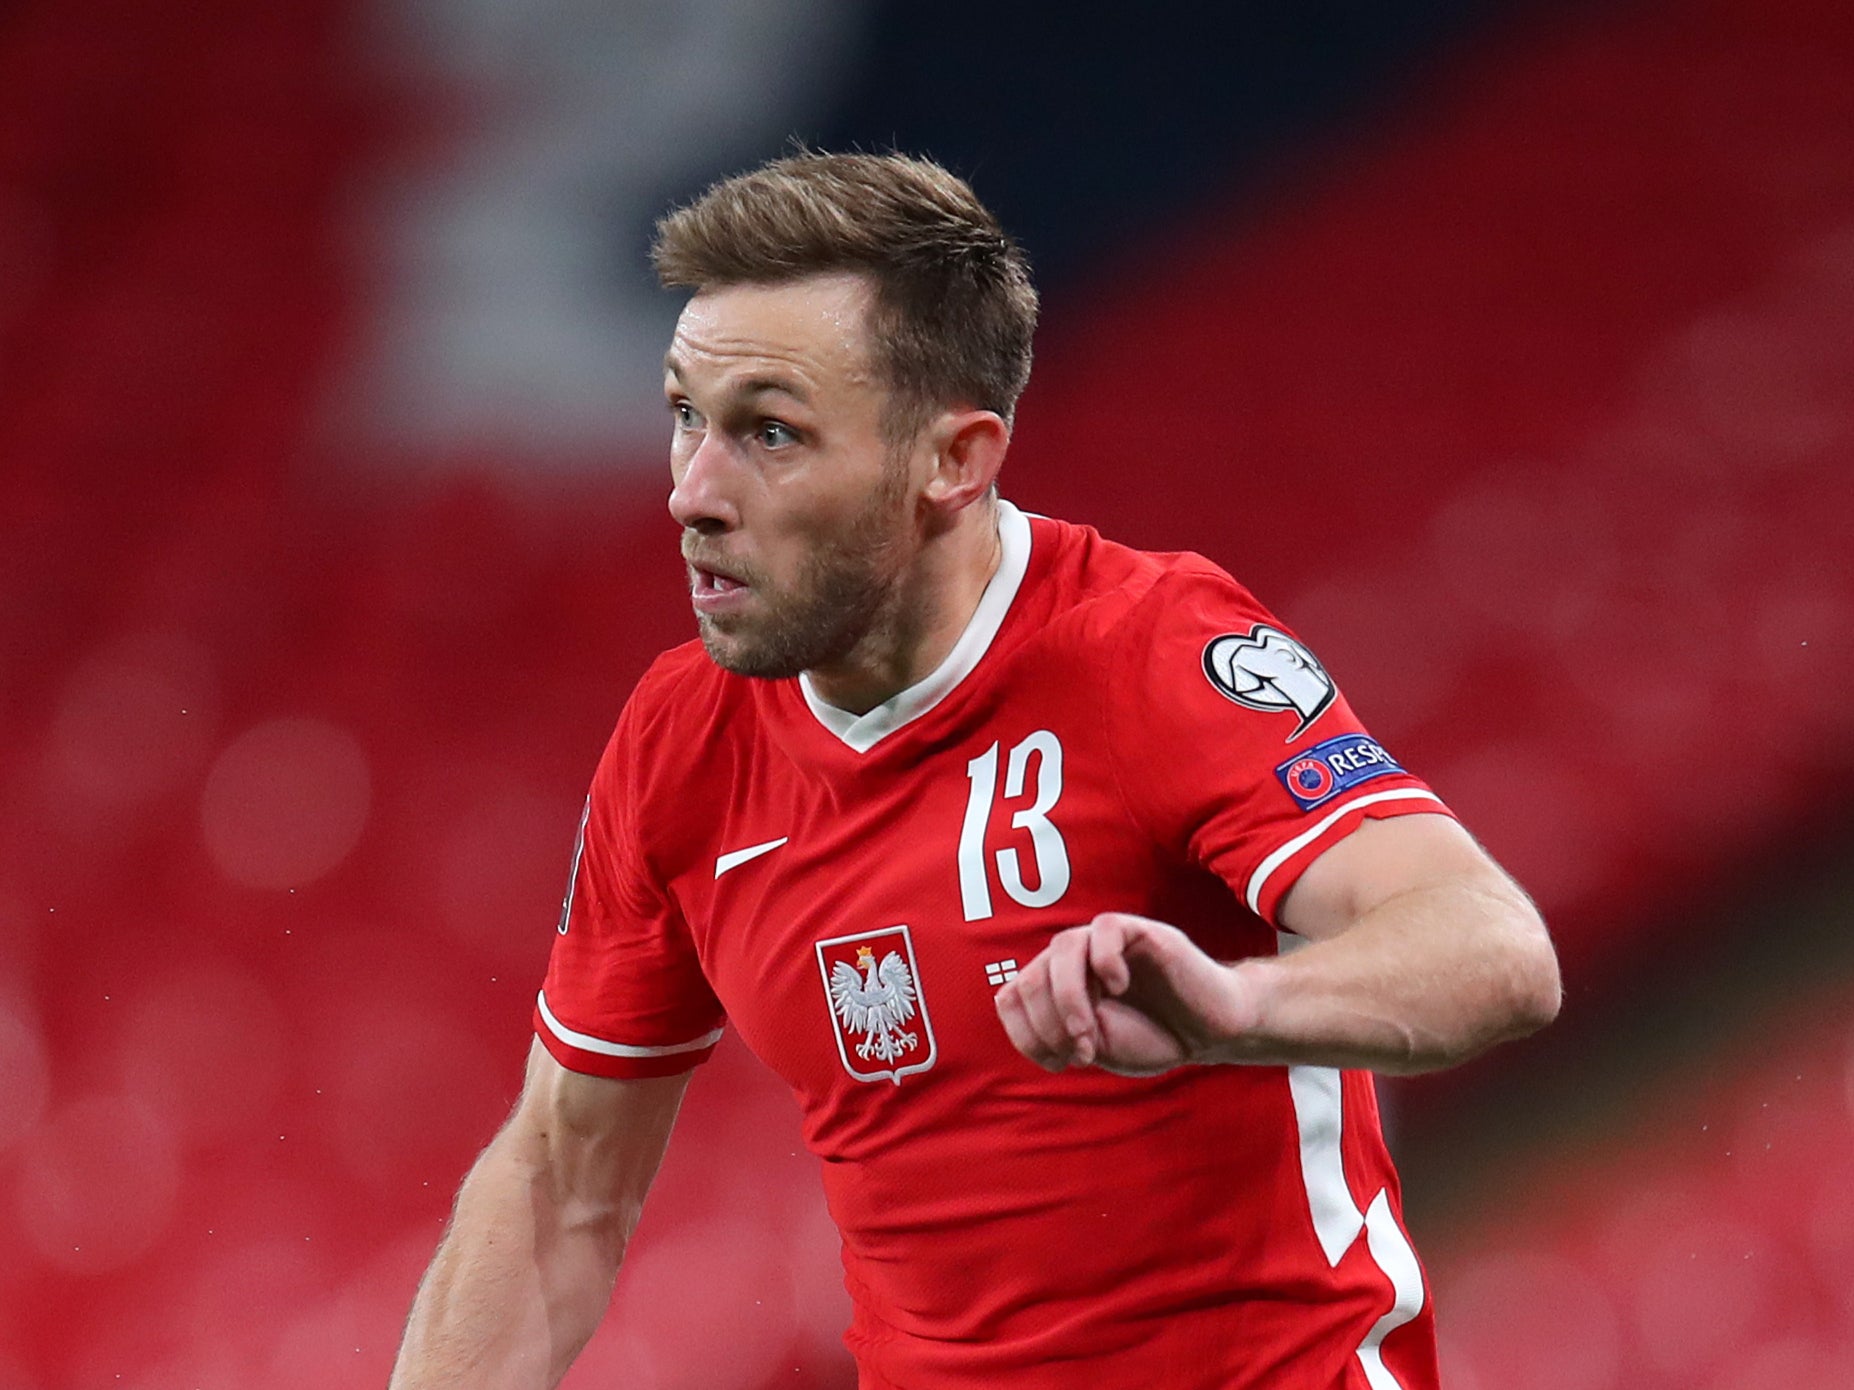 Full-back Maciej Rybus has moved from Lokomotiv to Spartak Moscow